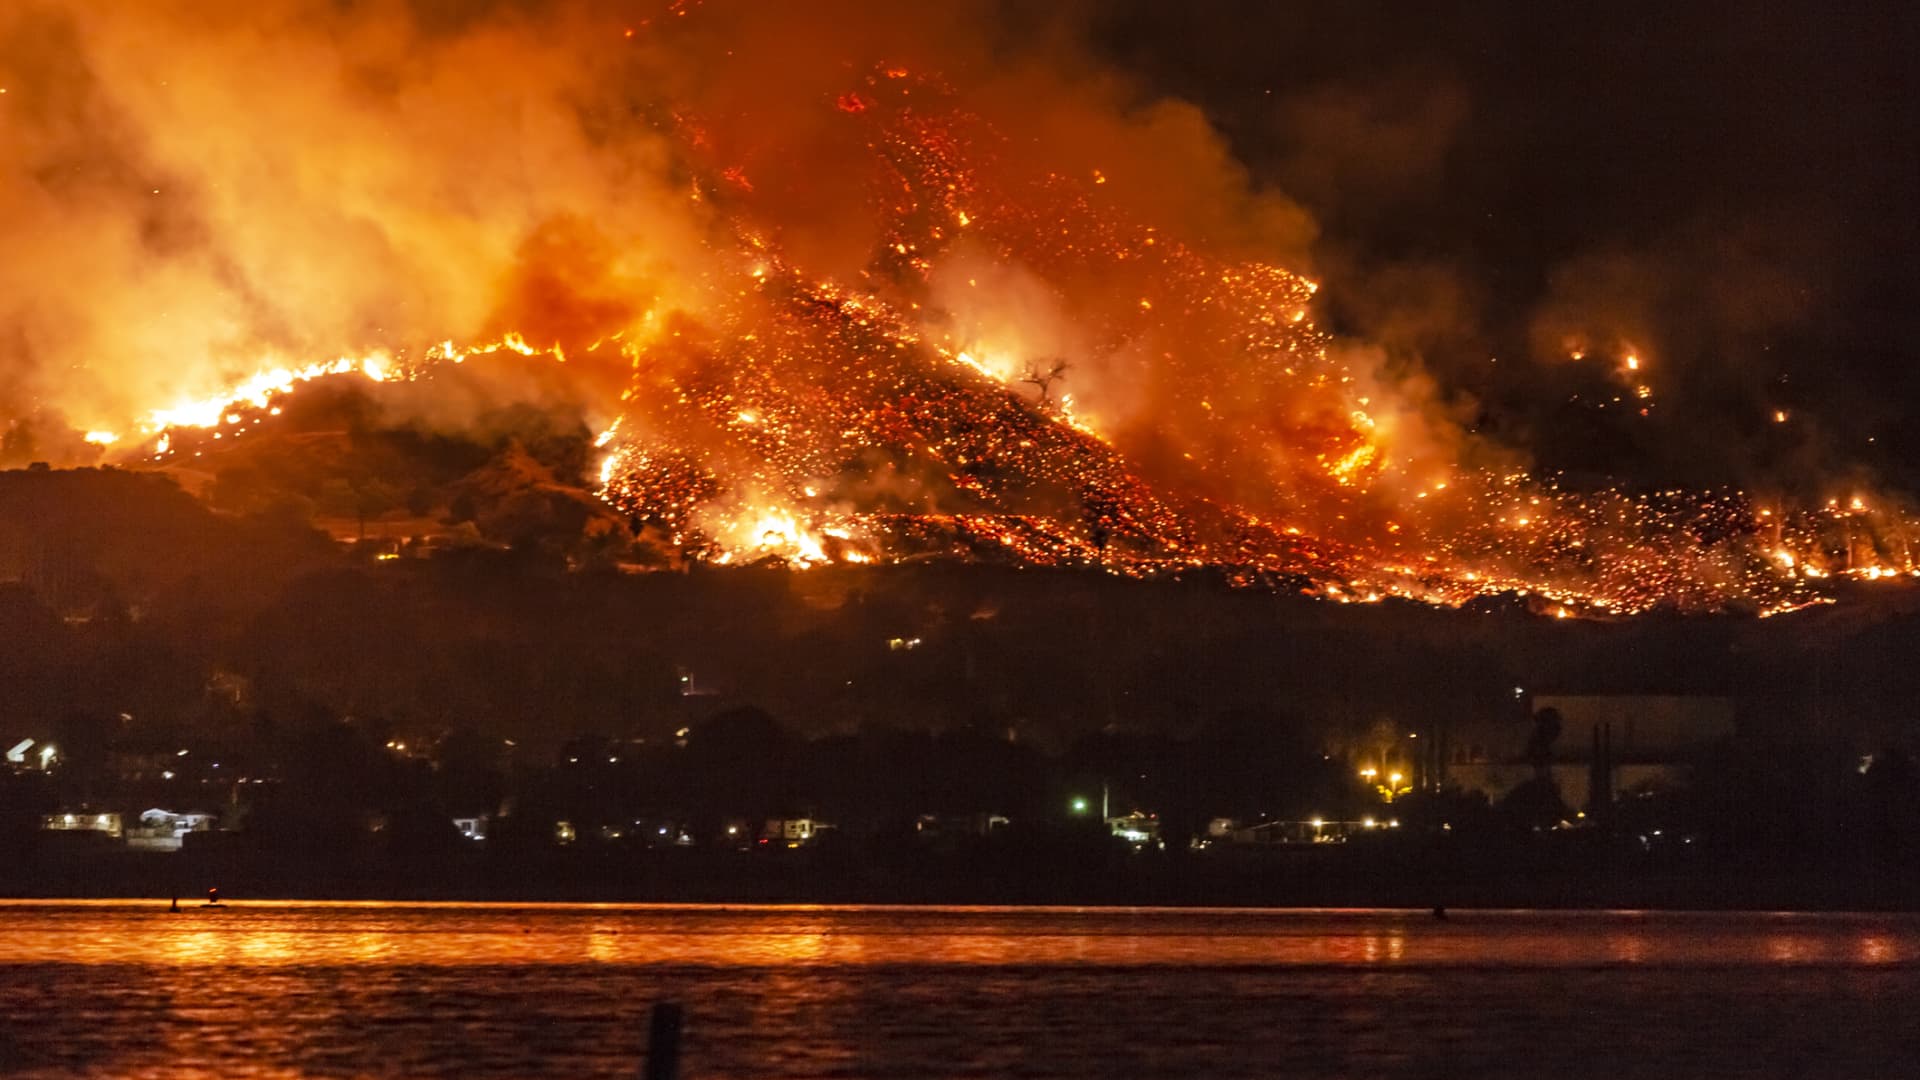 The Holy Fire at Lake Elsinore, California, on Aug. 9, 2018.